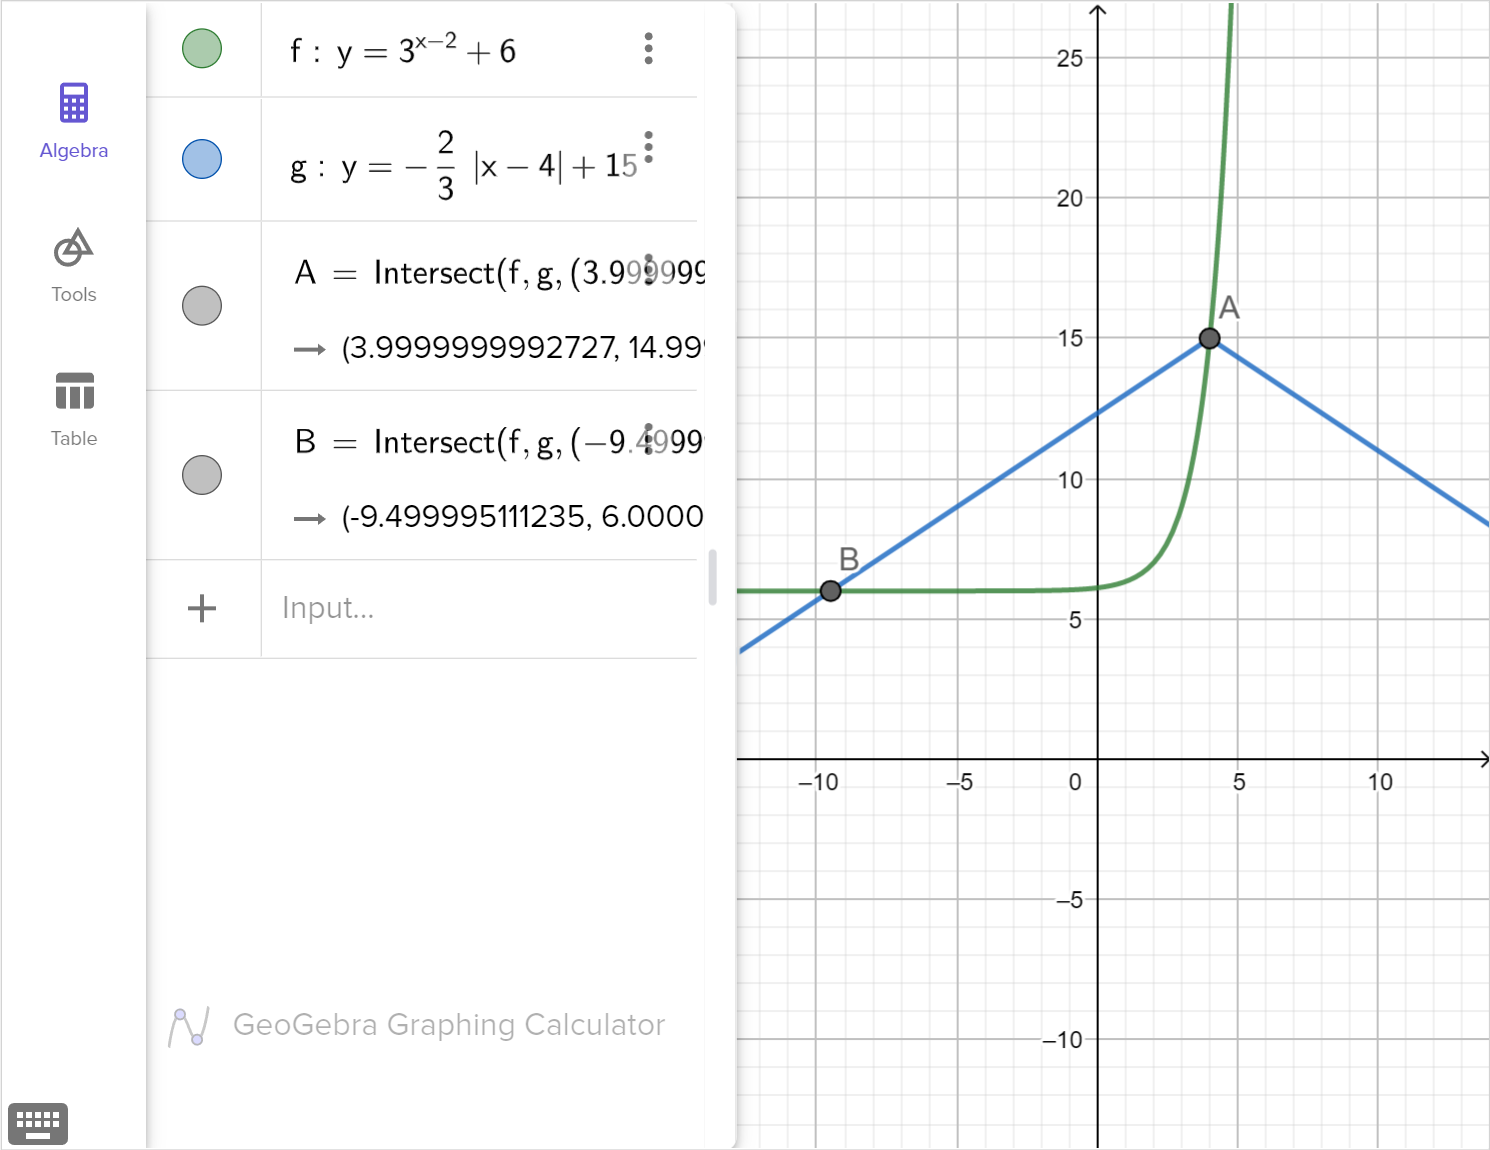 A screenshot of the GeoGebra graphing calculator showing the graphs of y equals 3 raised to the quantity x minus 2 plus 6 and y equals negative two thirds absolute value of the quantity x minus 4 plus 15. Two points of intersection of the two graphs are highlighted. Speak to your teacher for more details.